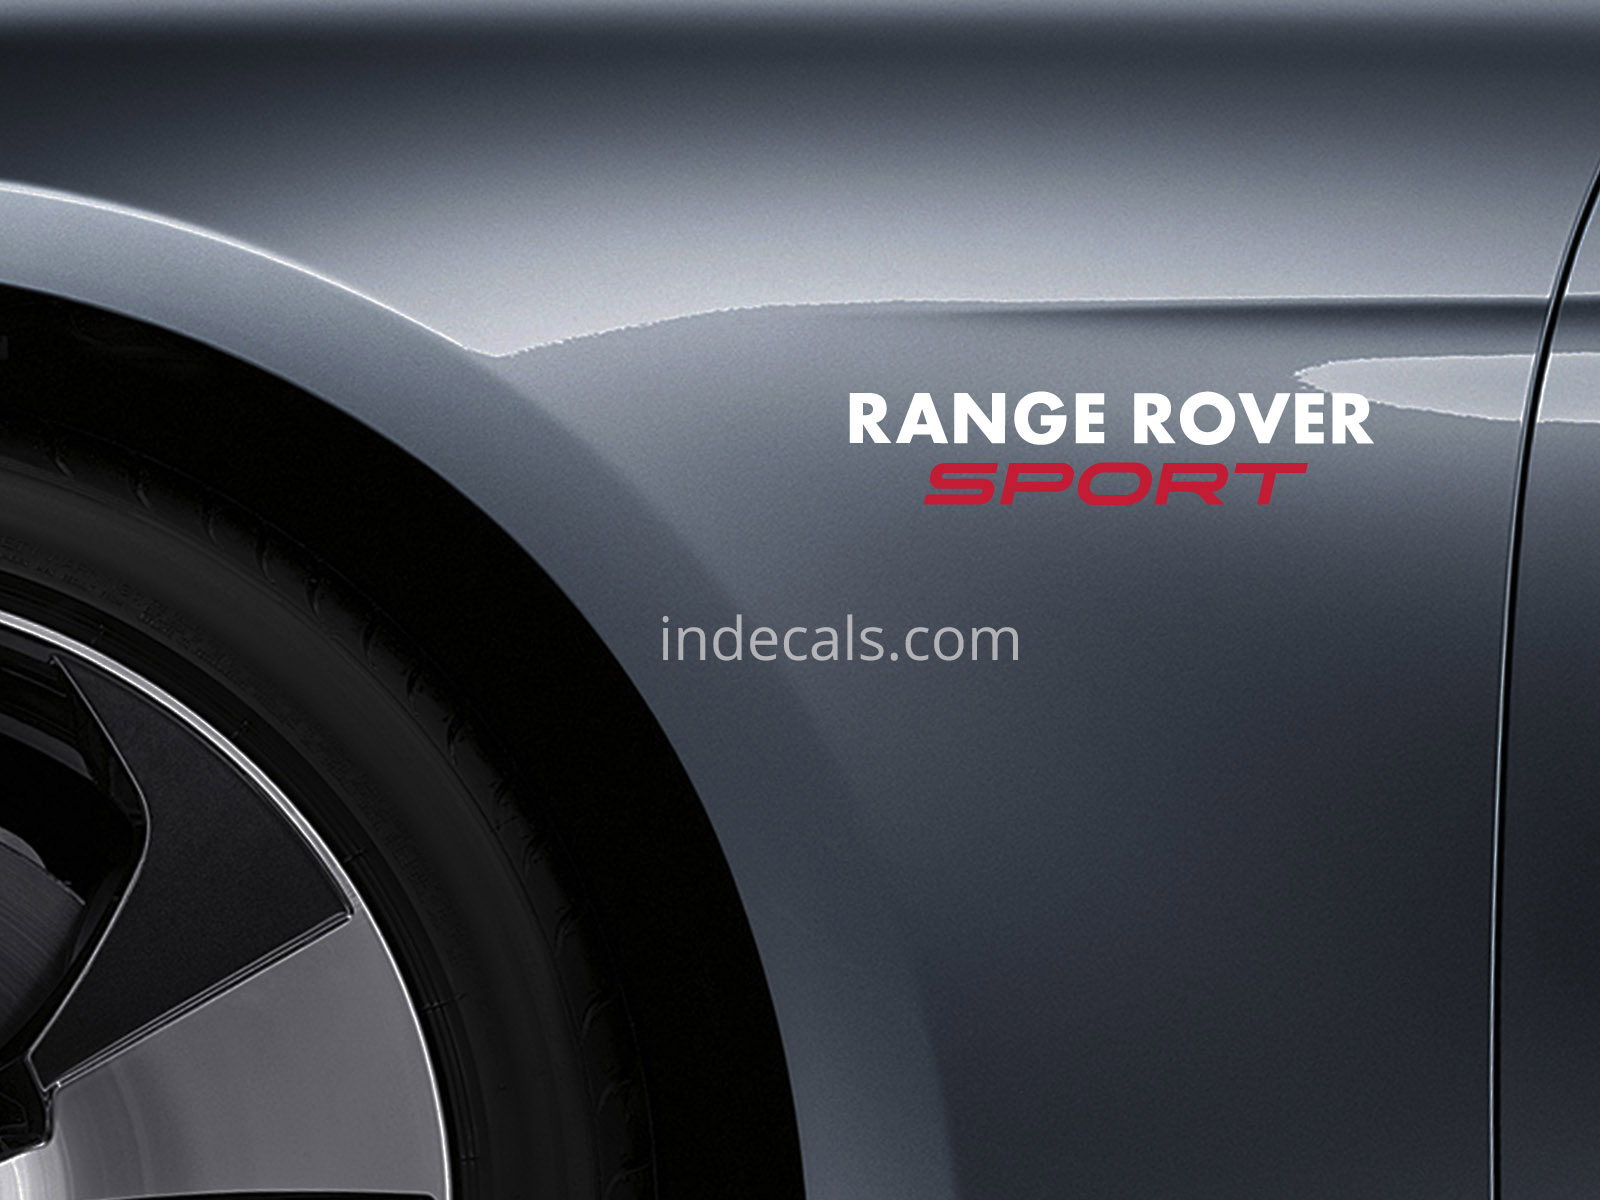 2 x Range Rover Sports Stickers for Wings - White & Red